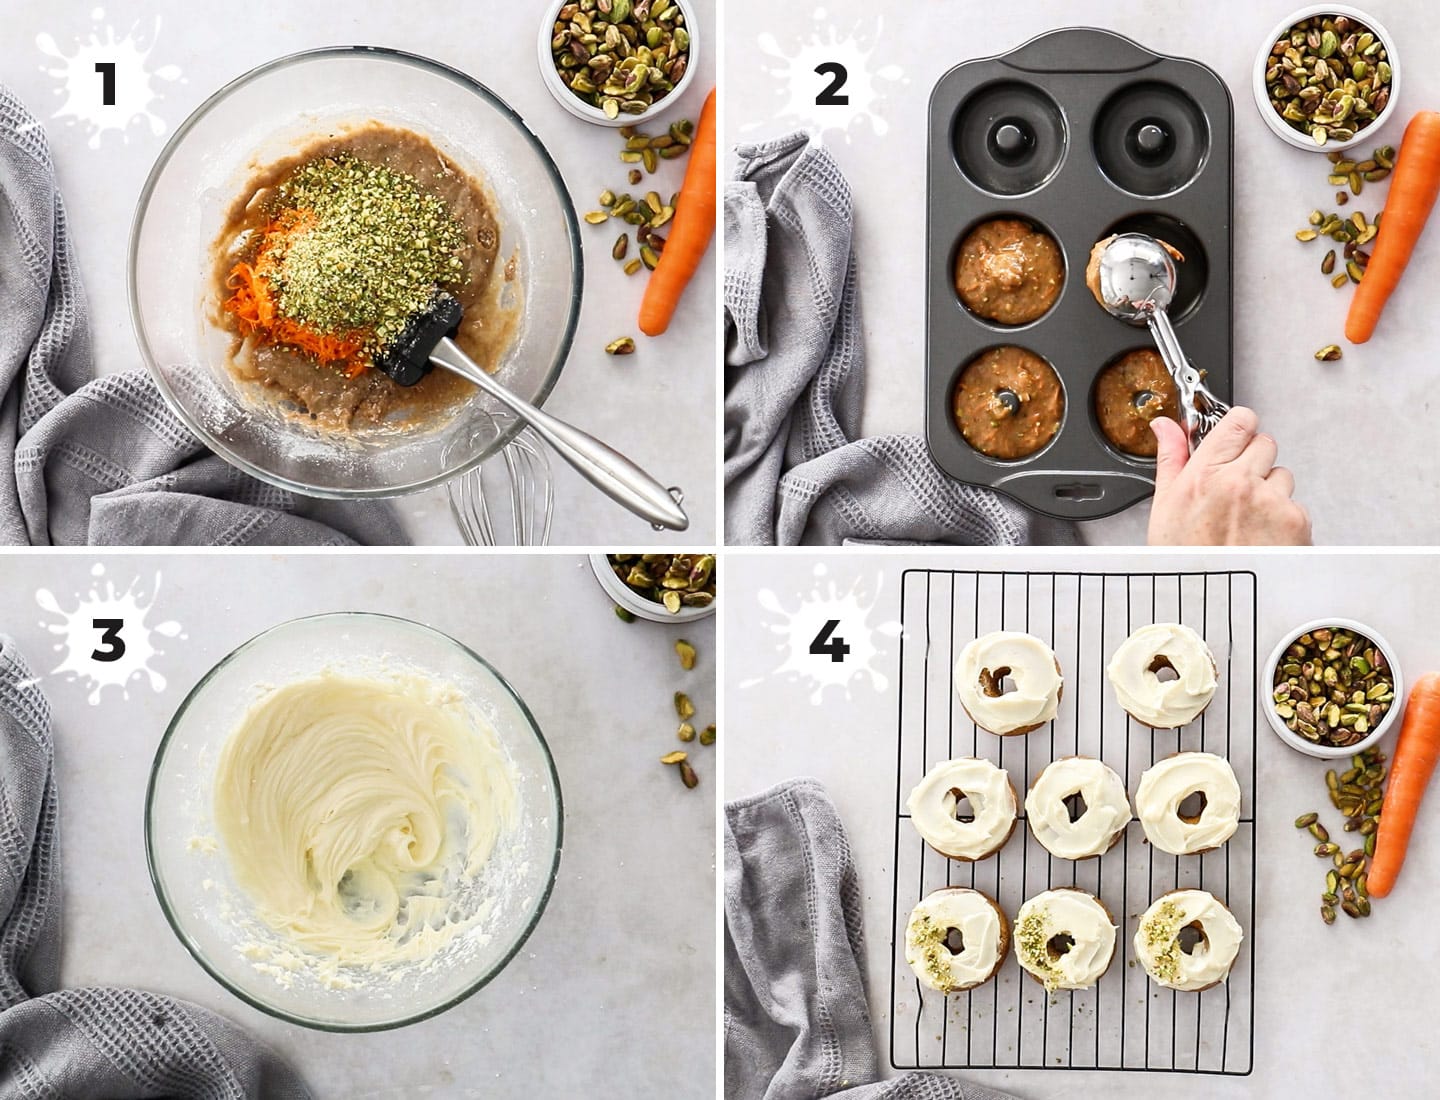 A collage of 4 images showing how to make carrot cake donuts.